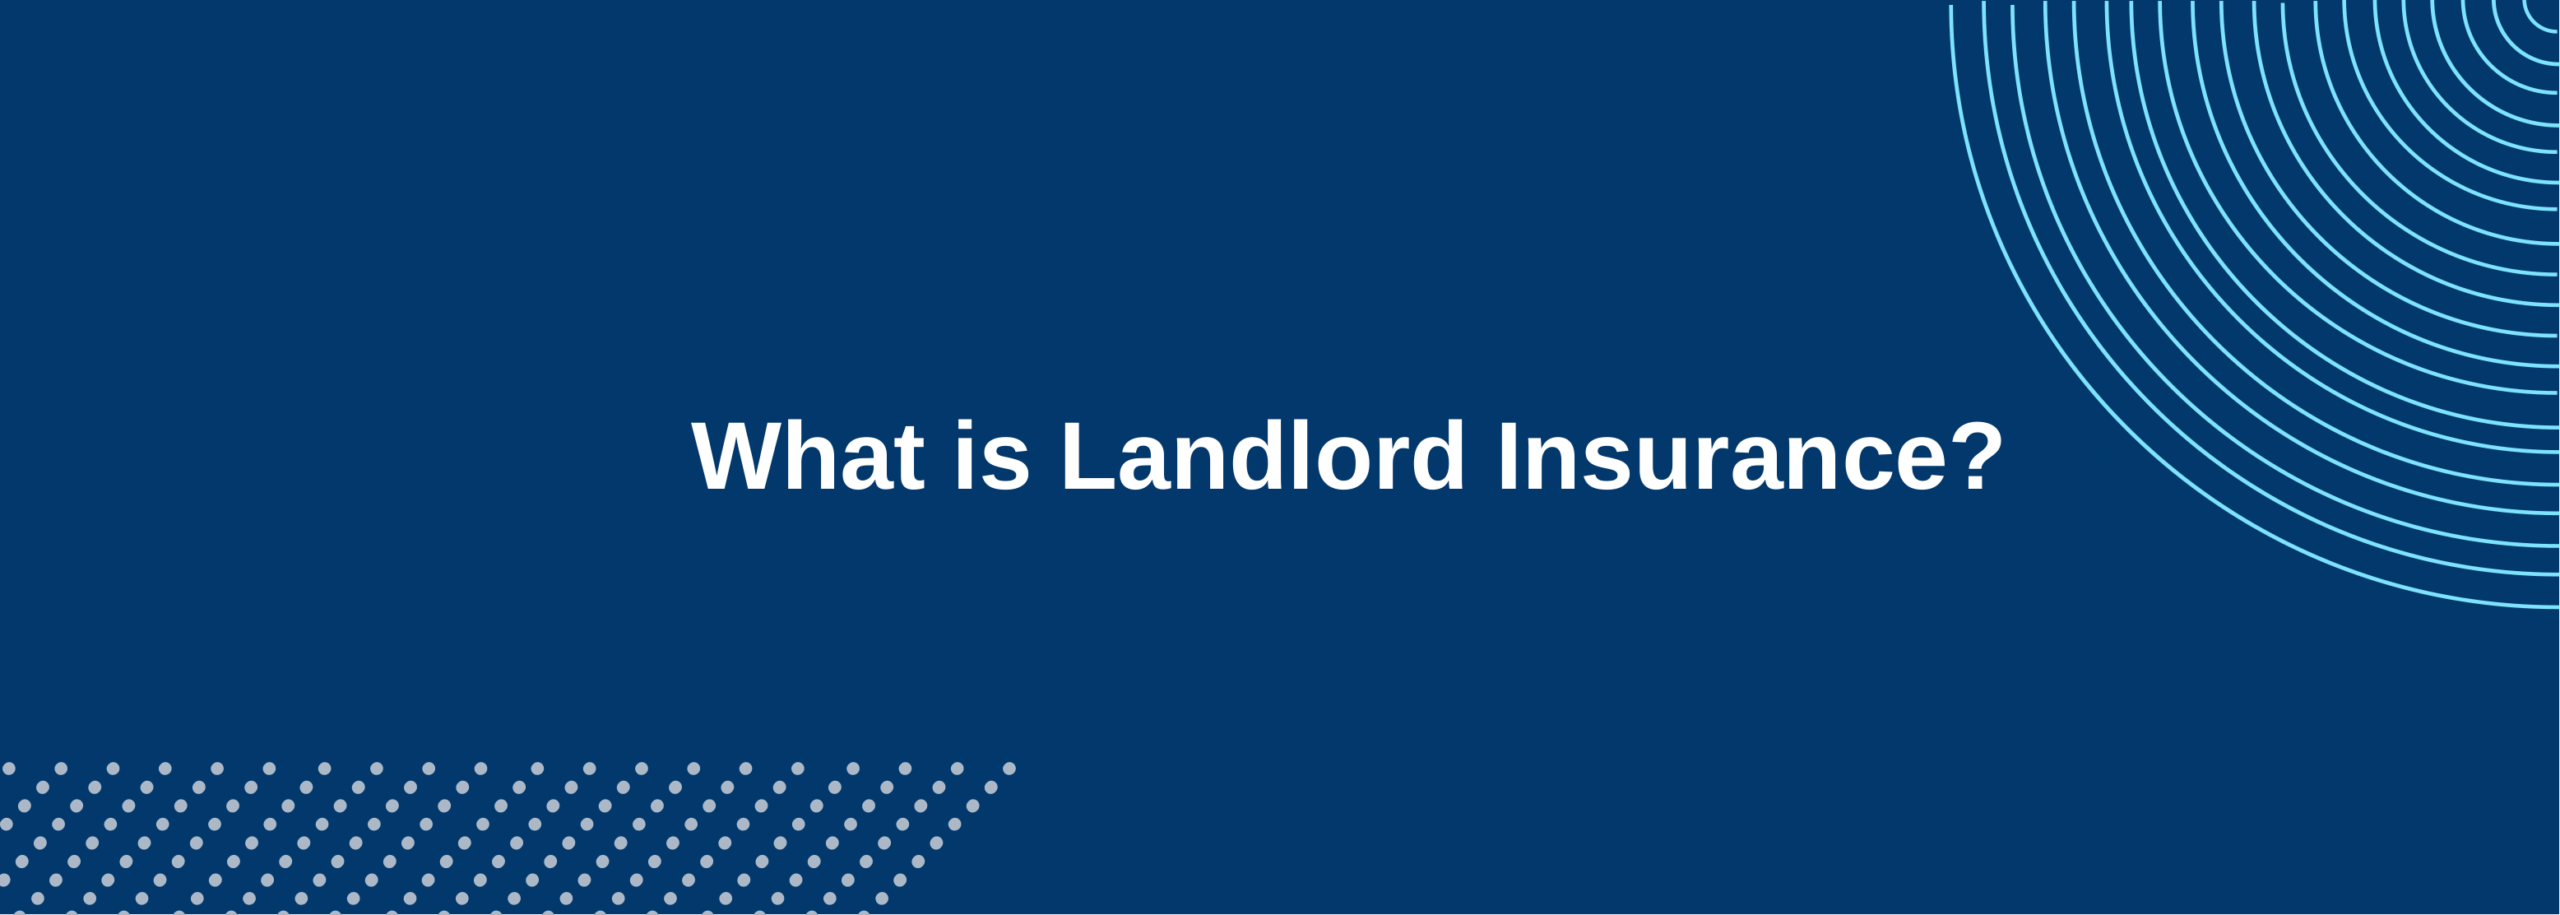 Landlord insurance is a type of insurance policy that protects property owners who rent out their property.